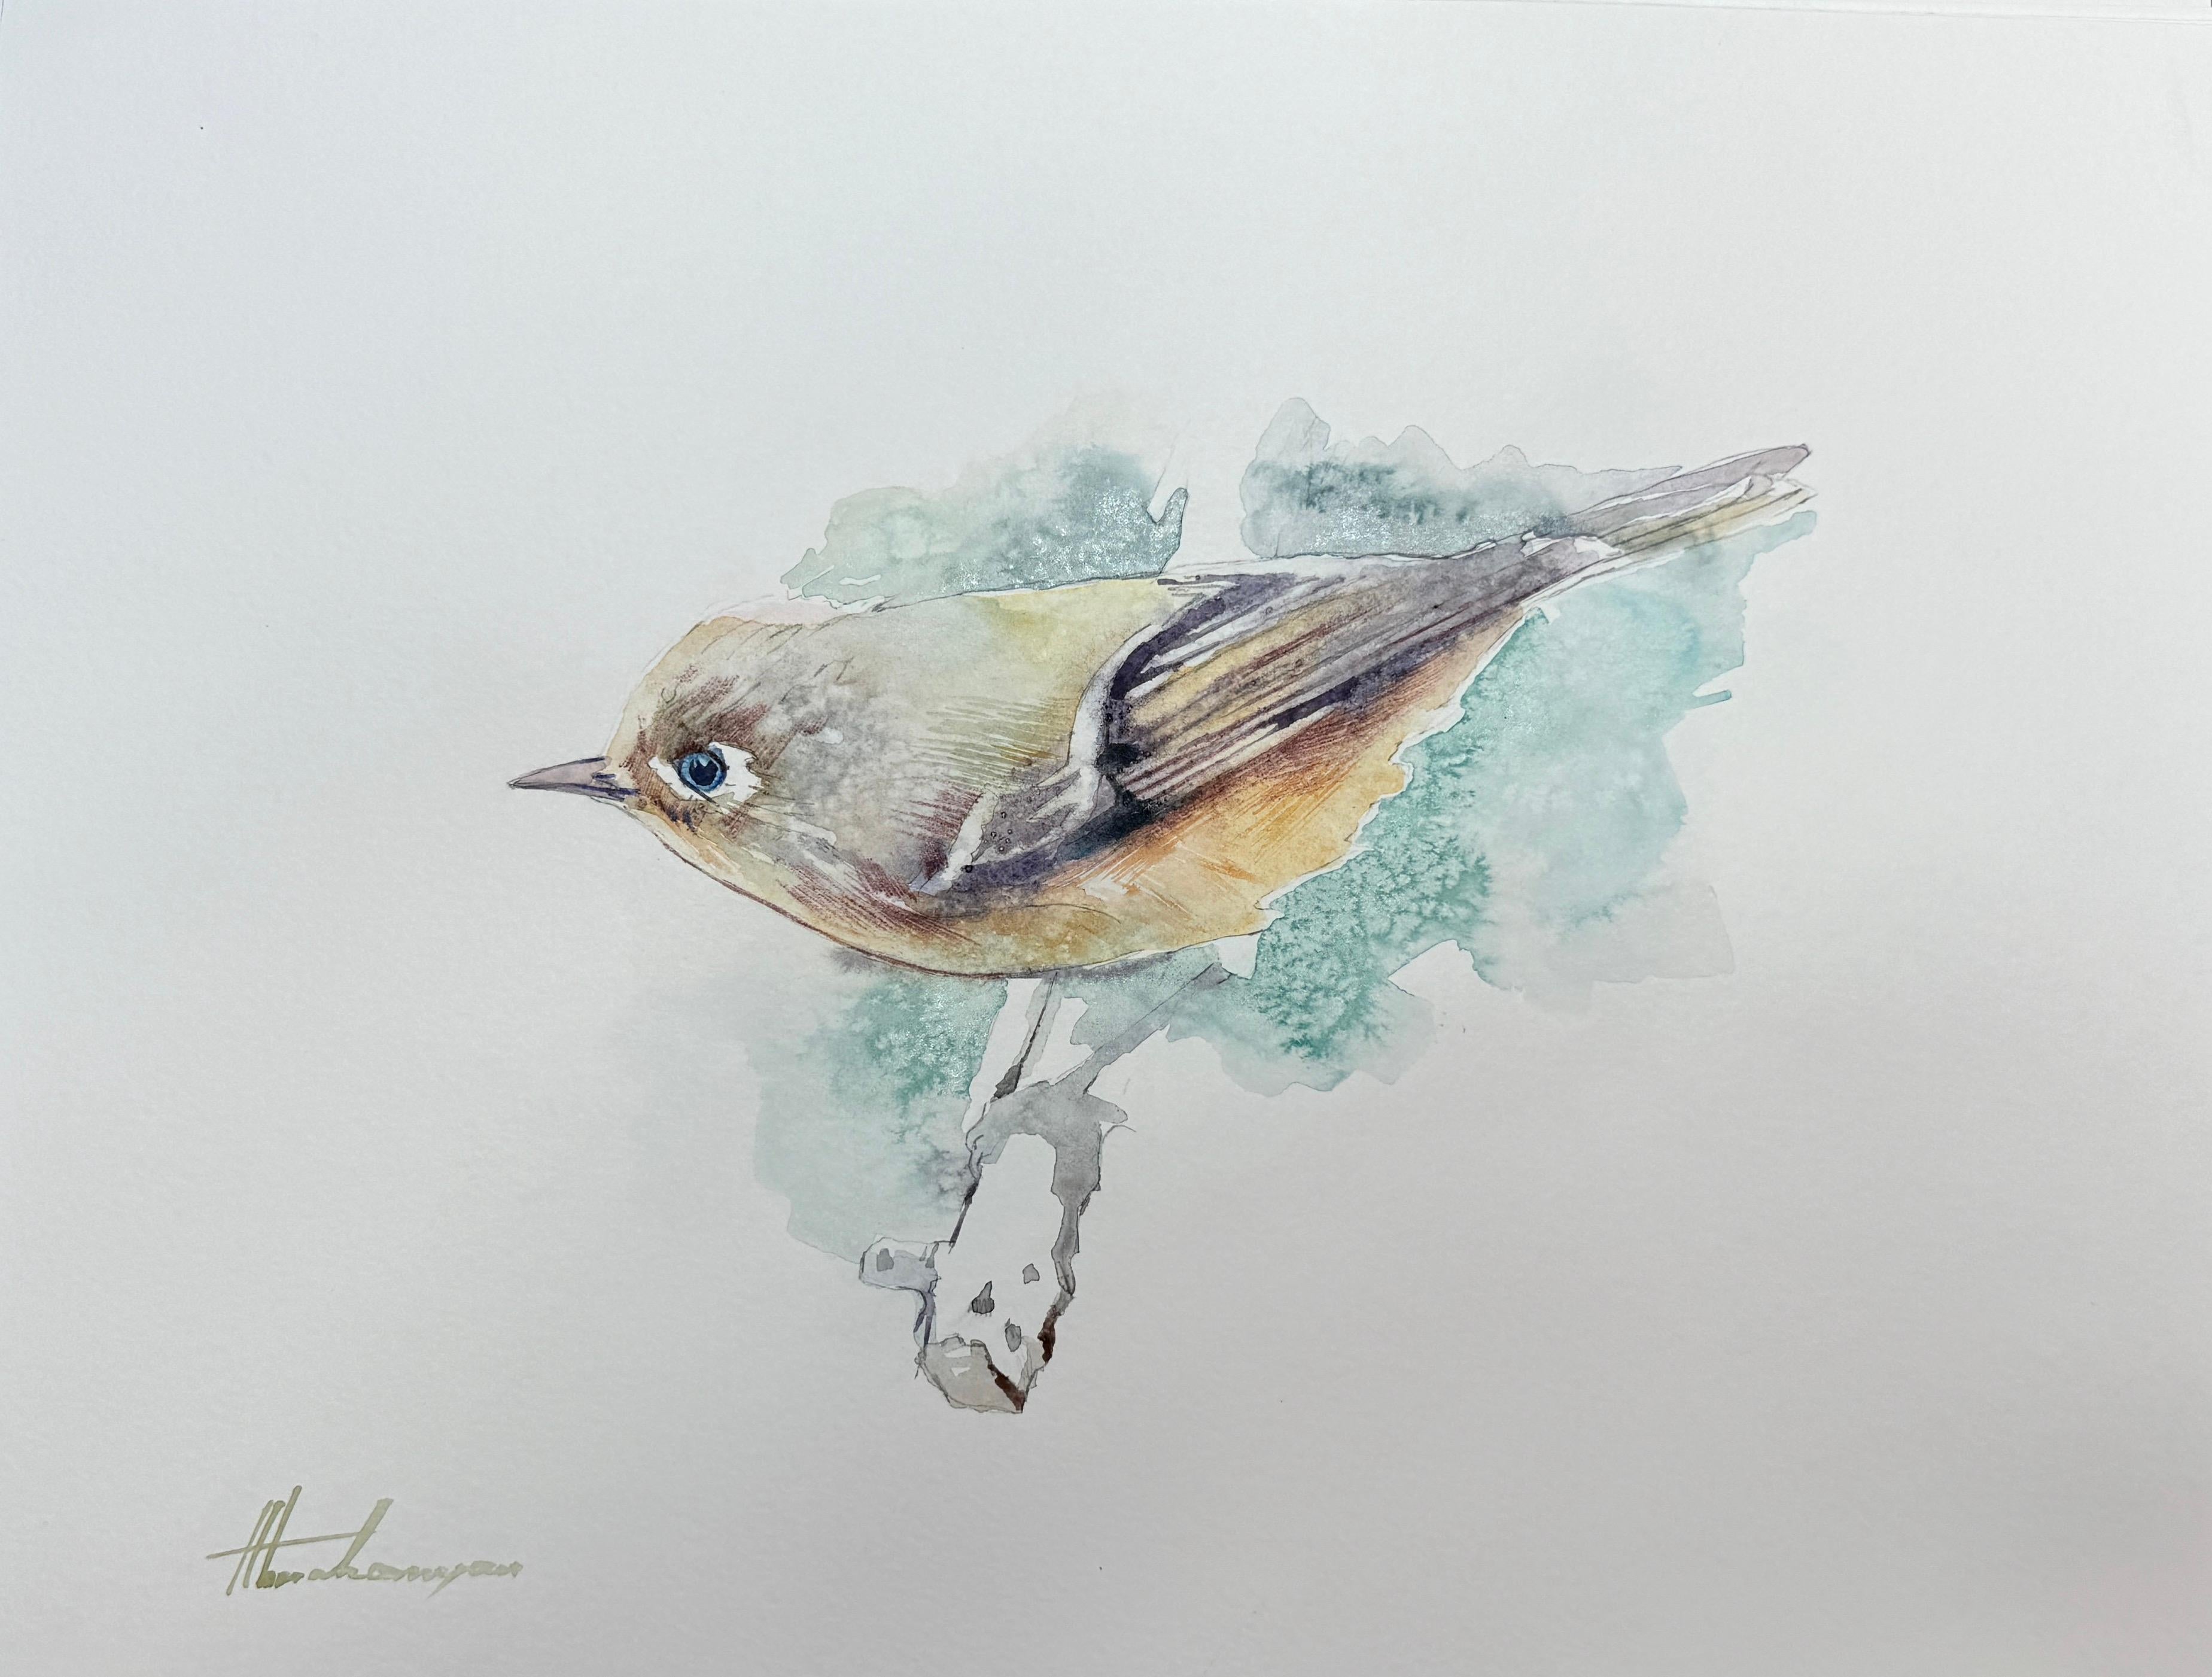 Artyom Abrahamyan Animal Art - Warbler, Bird, Watercolor on Paper, Handmade Painting, One of a Kind